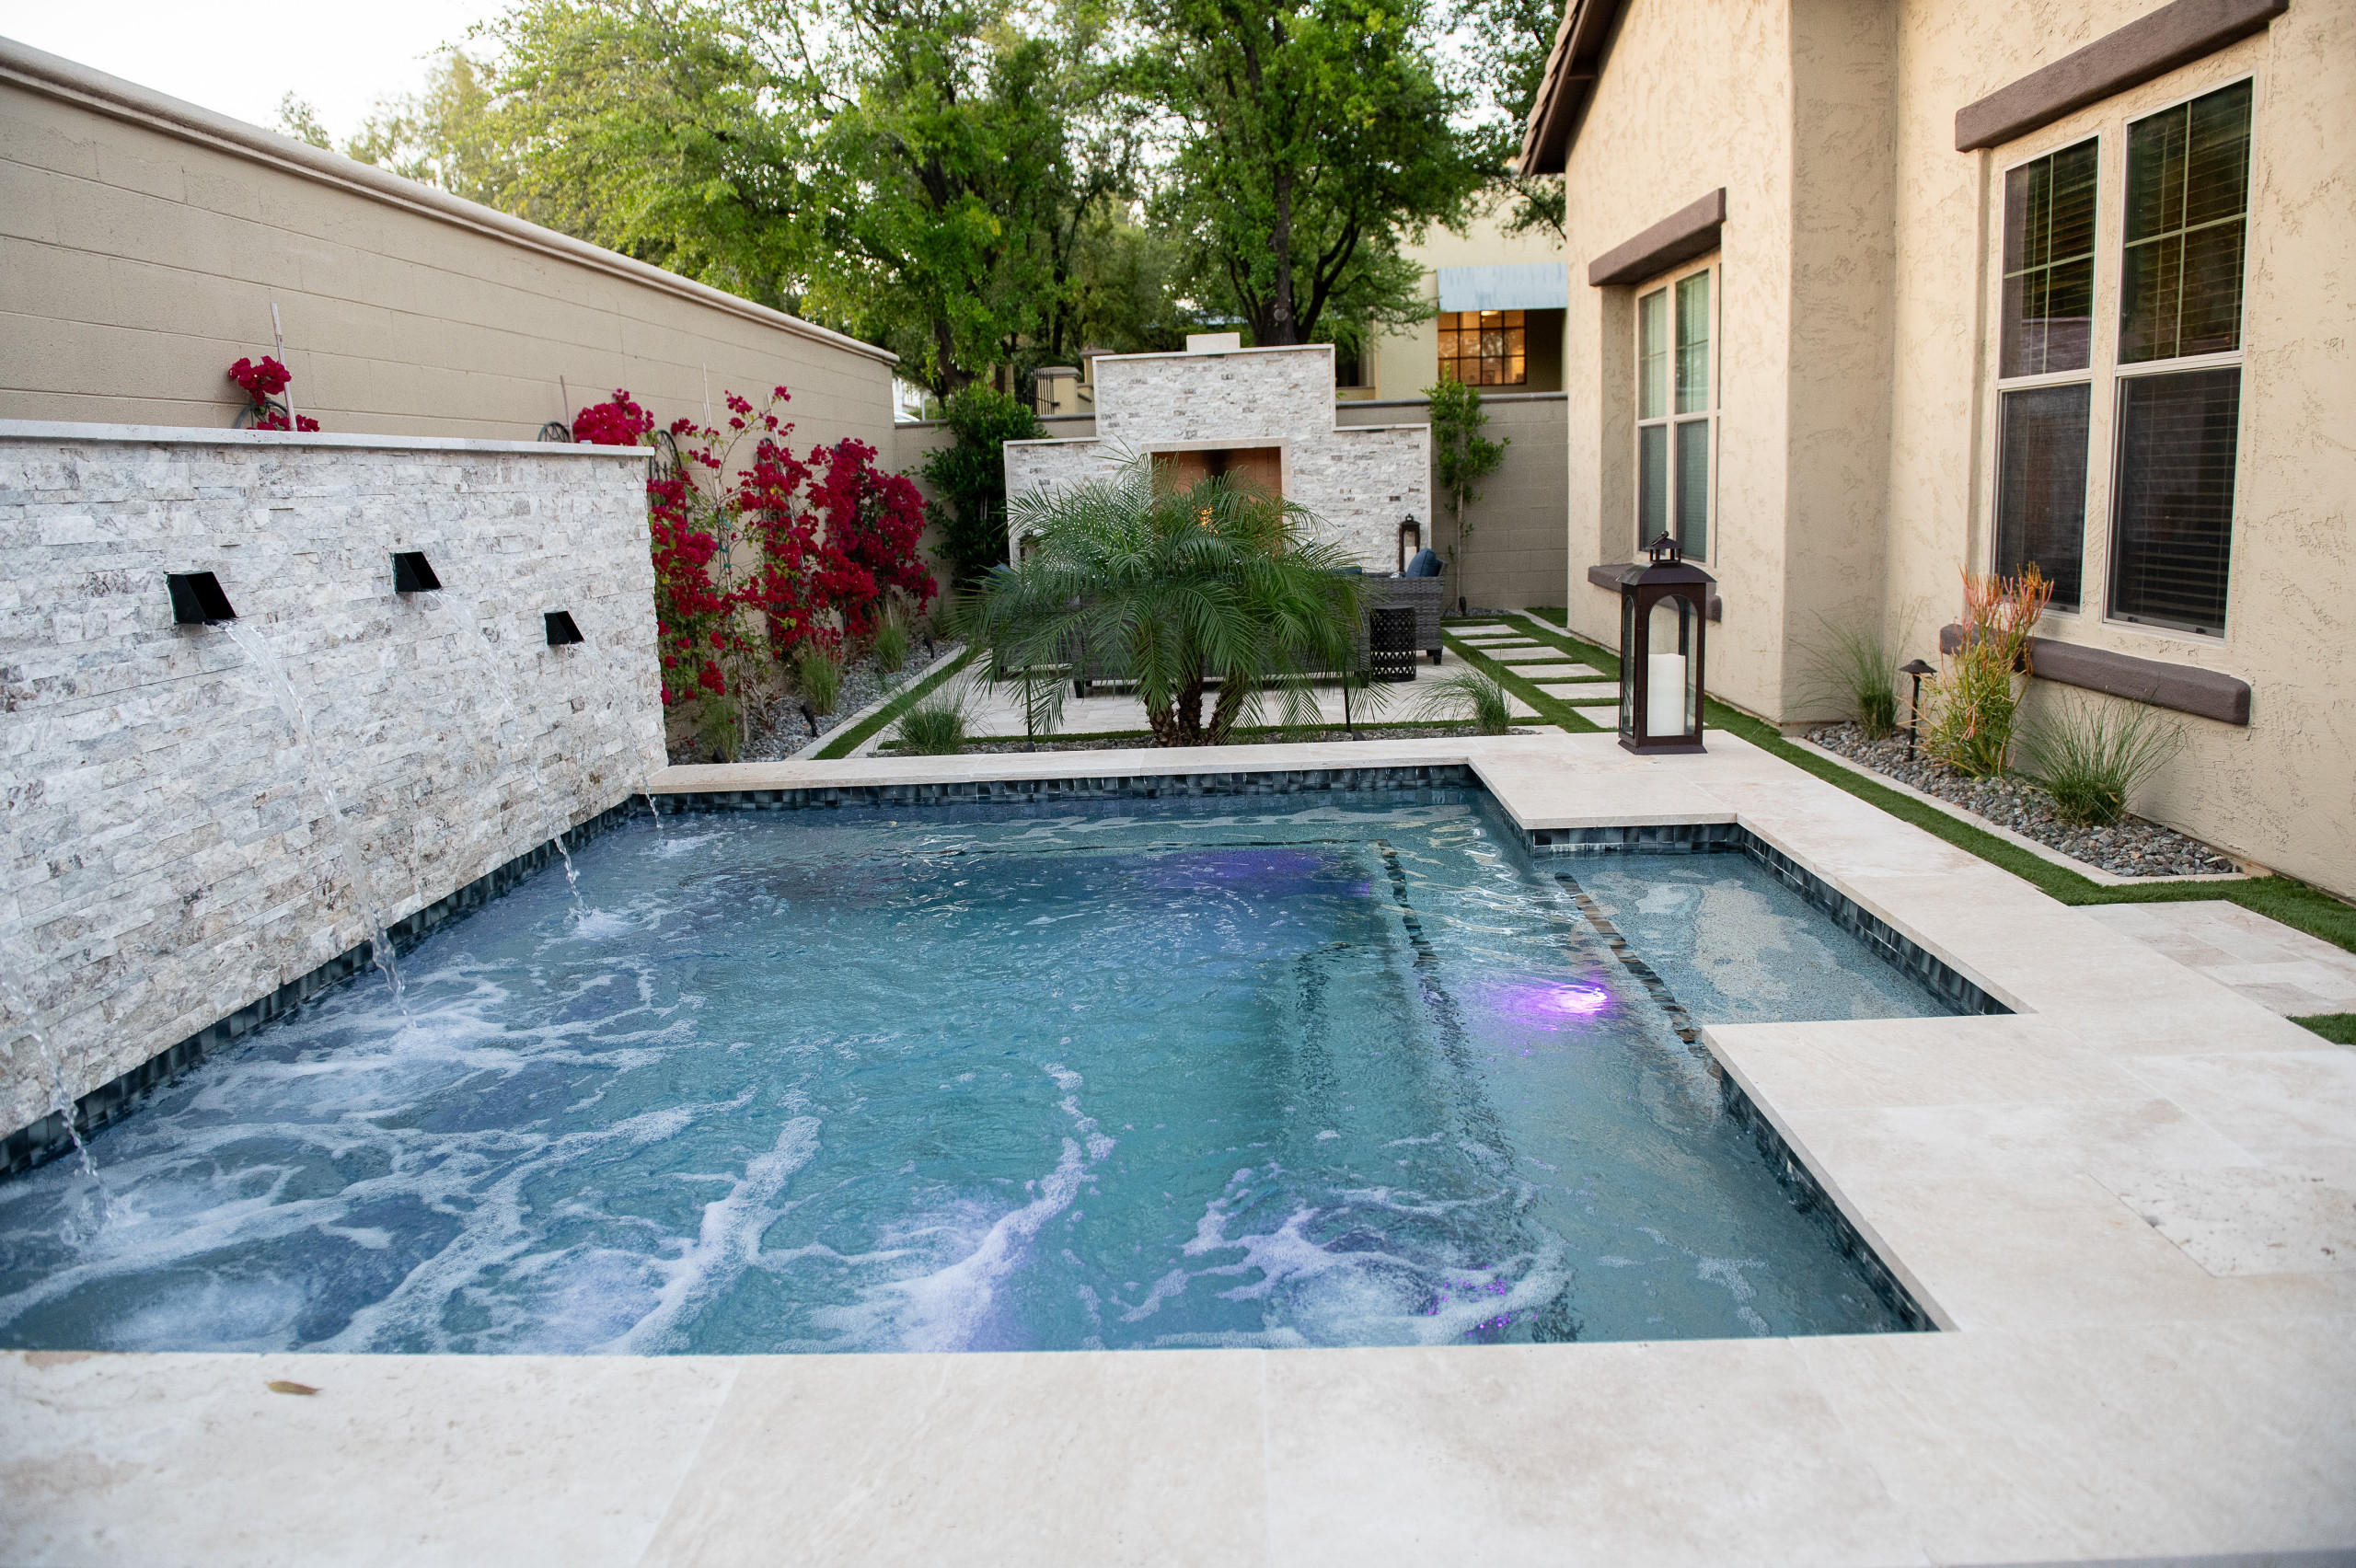 Swimming pool, Spa, Fireplace, landscaping